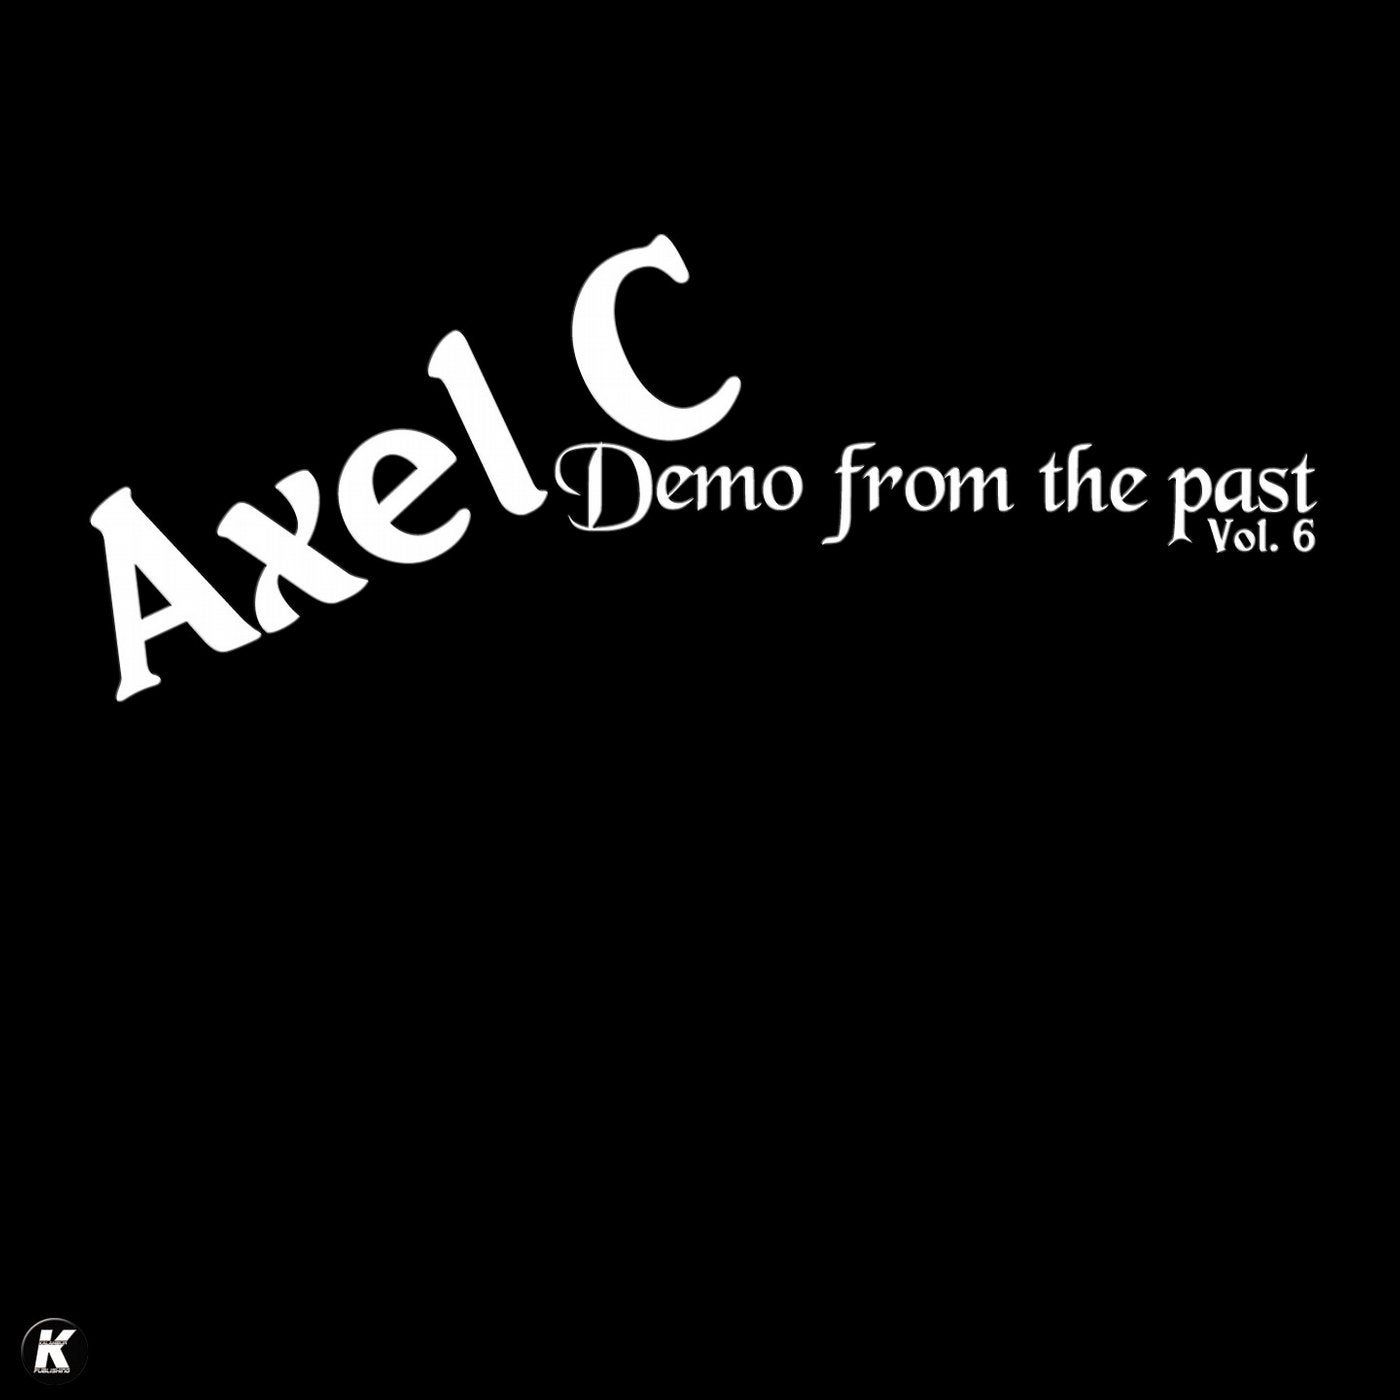 DEMO FROM THE PAST VOL 6